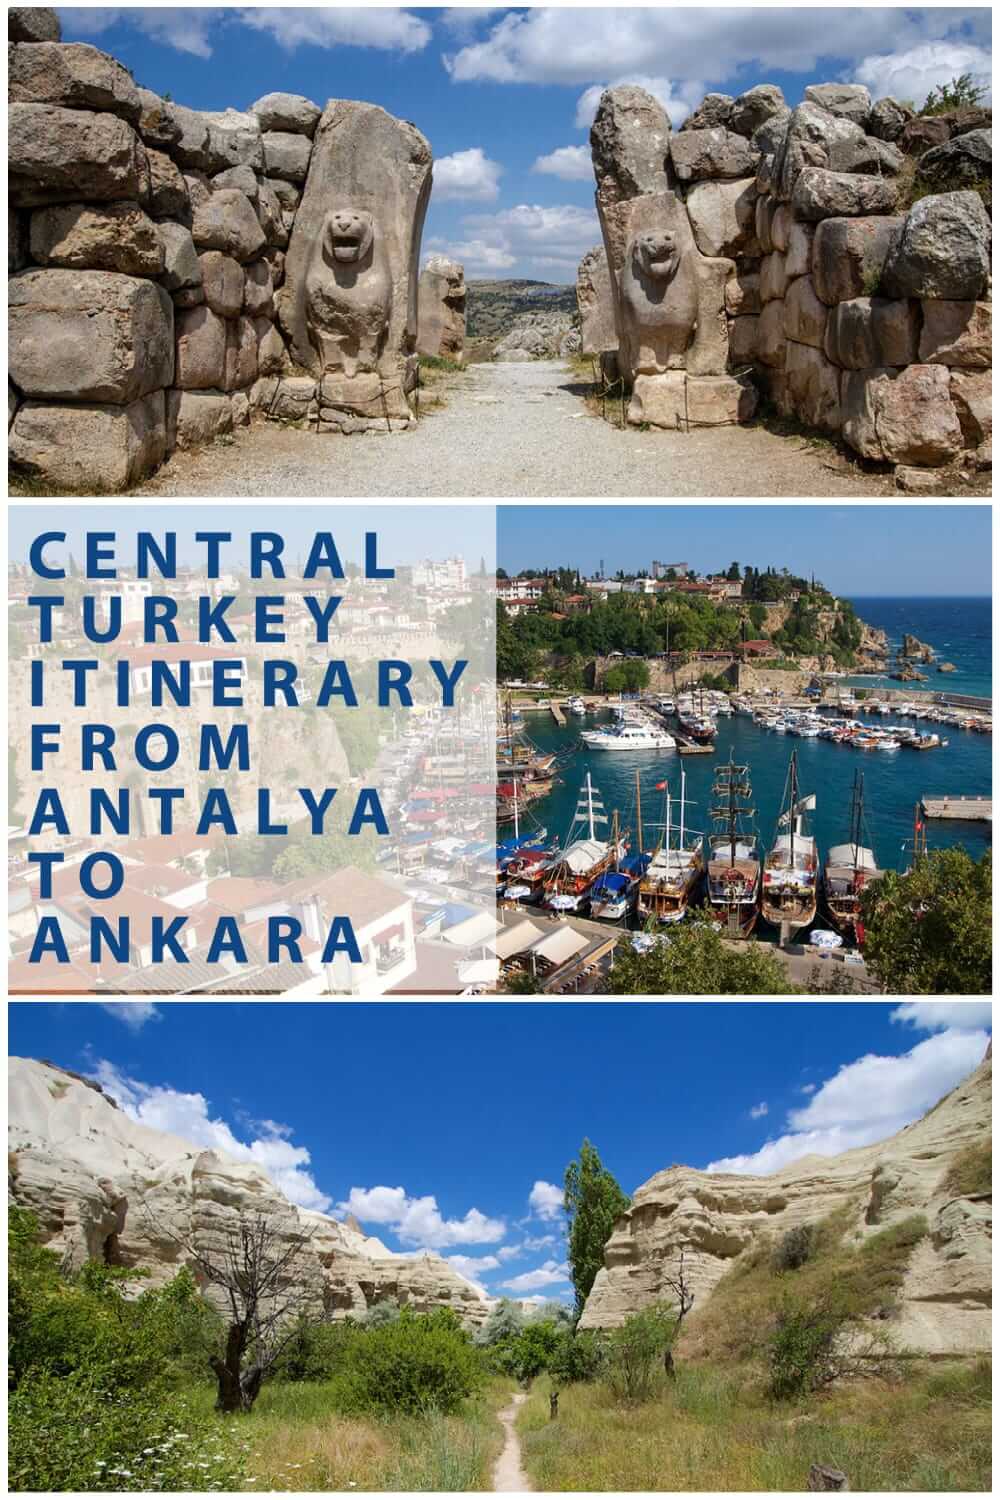 Central Turkey itinerary from Antalya to Ankara for backpackers and independent travellers #travel #backpacking #travelplanning #europe